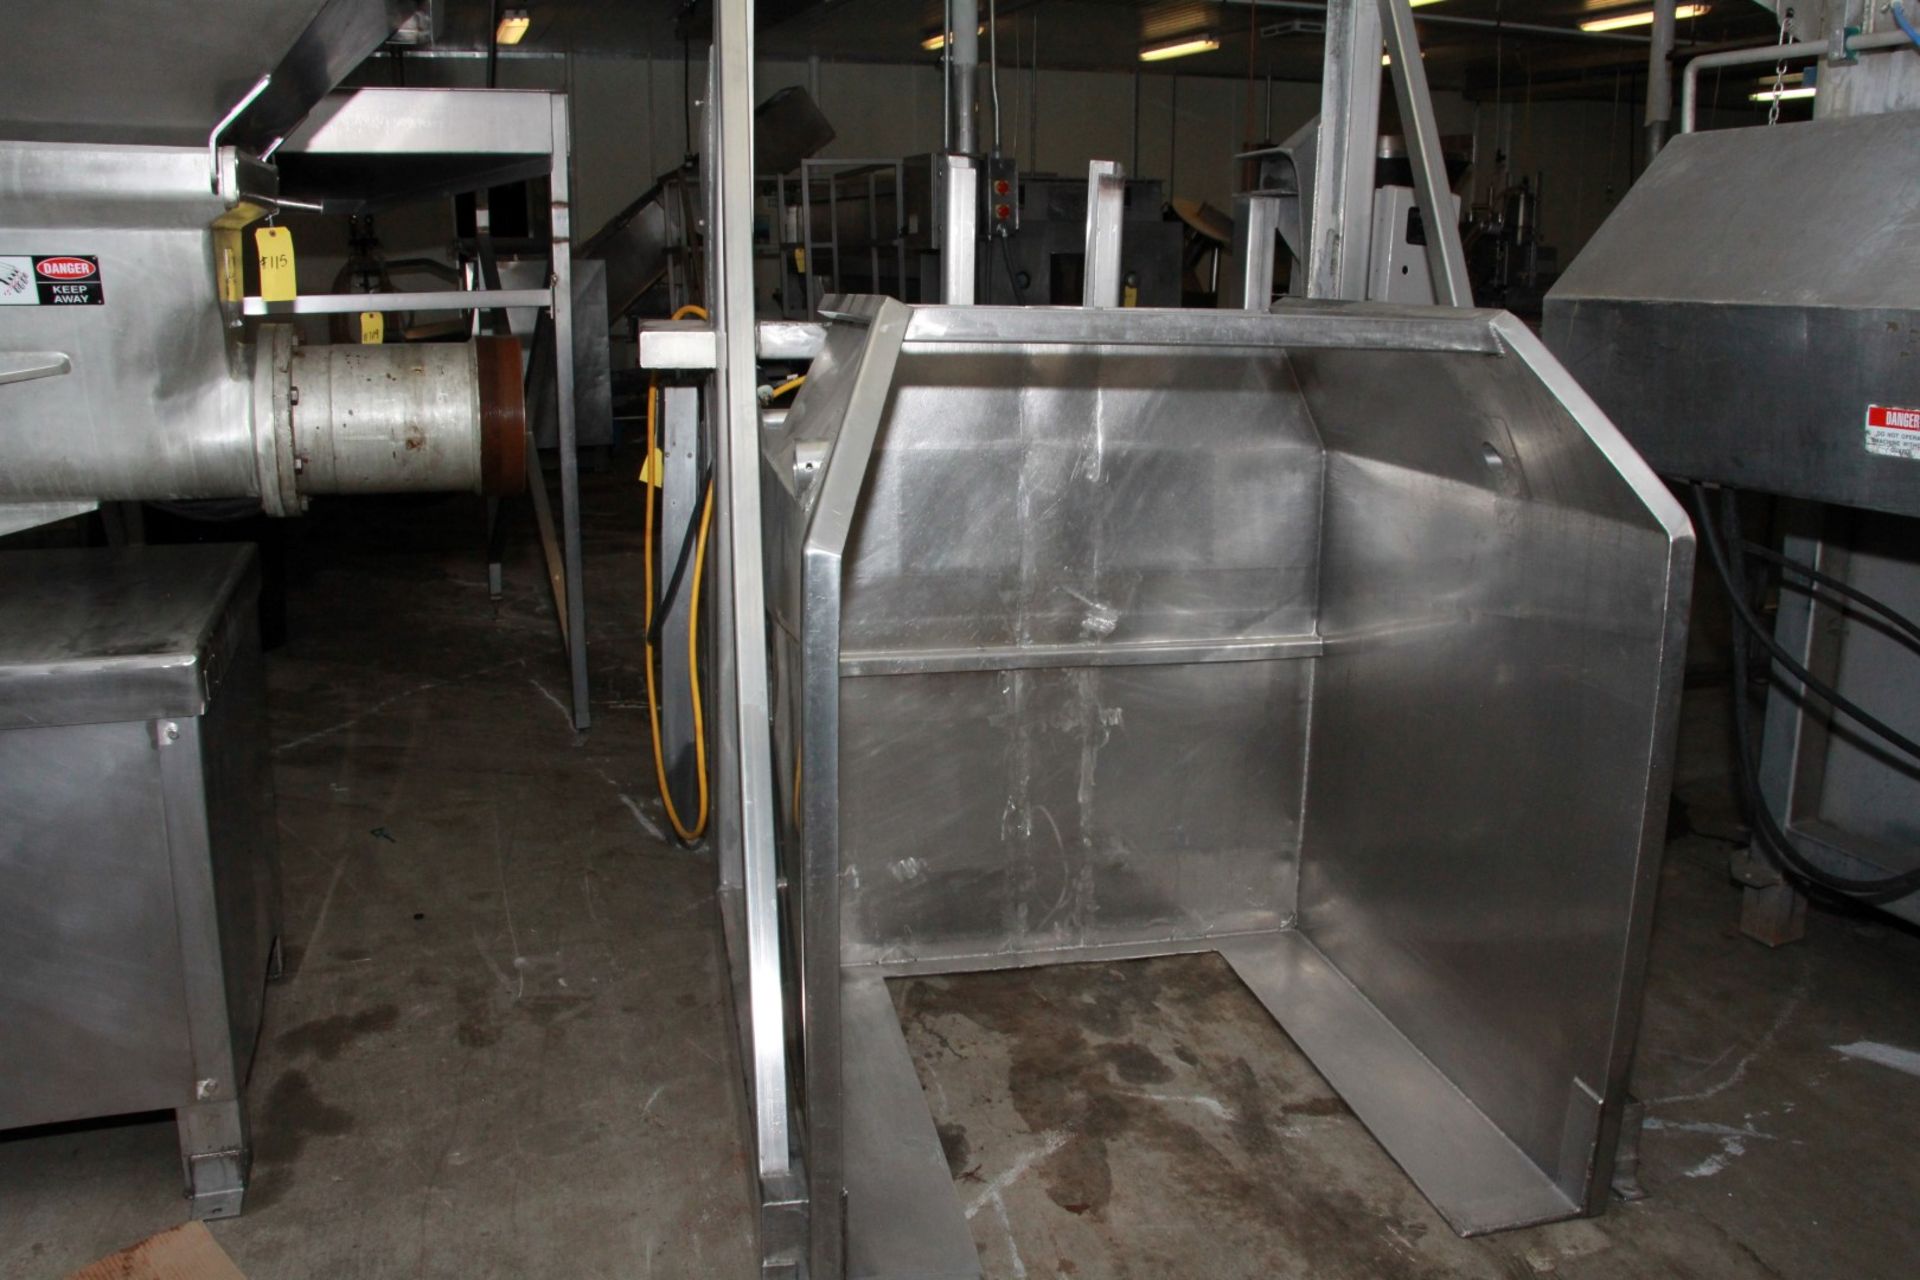 STAINLESS STEEL VAT DUMPER, LIFT, AND PIVOT. UNKNOWN MAKE AND MODEL. - Image 3 of 6